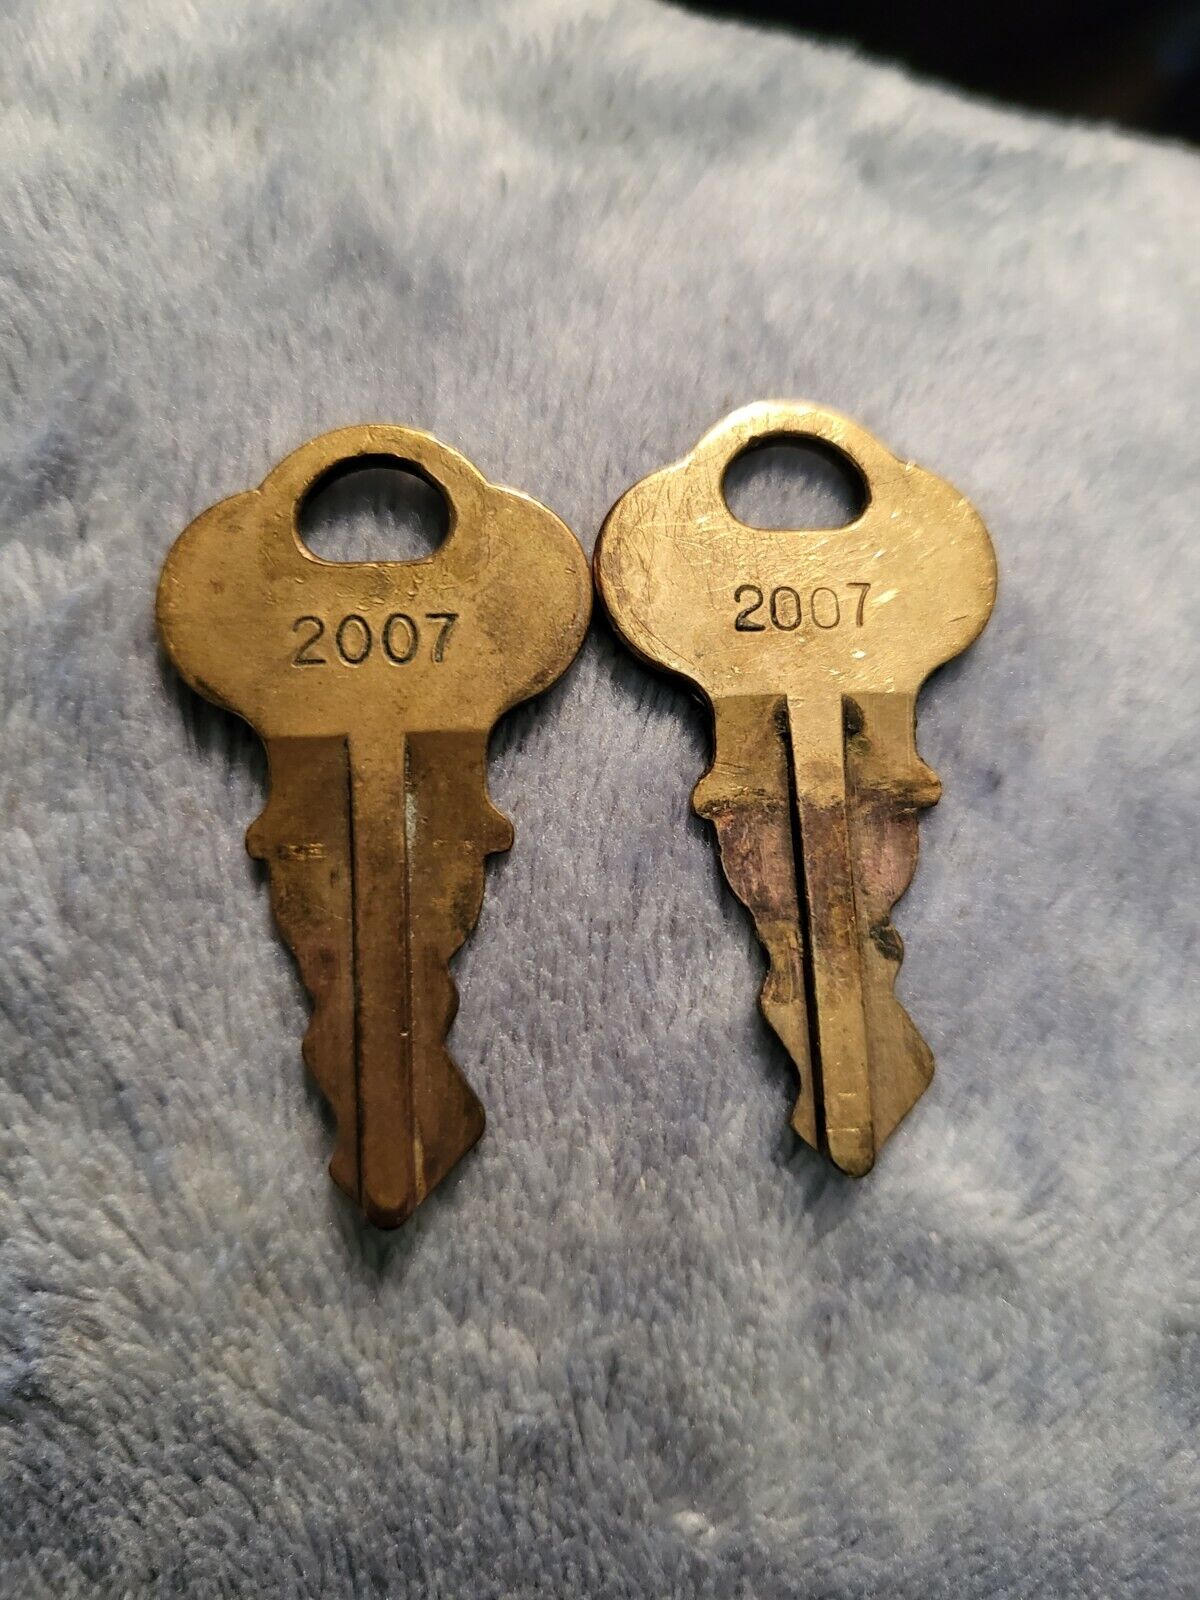 Fountain soda machine keys 2007 lot of (2) used Unbranded Does Not Apply